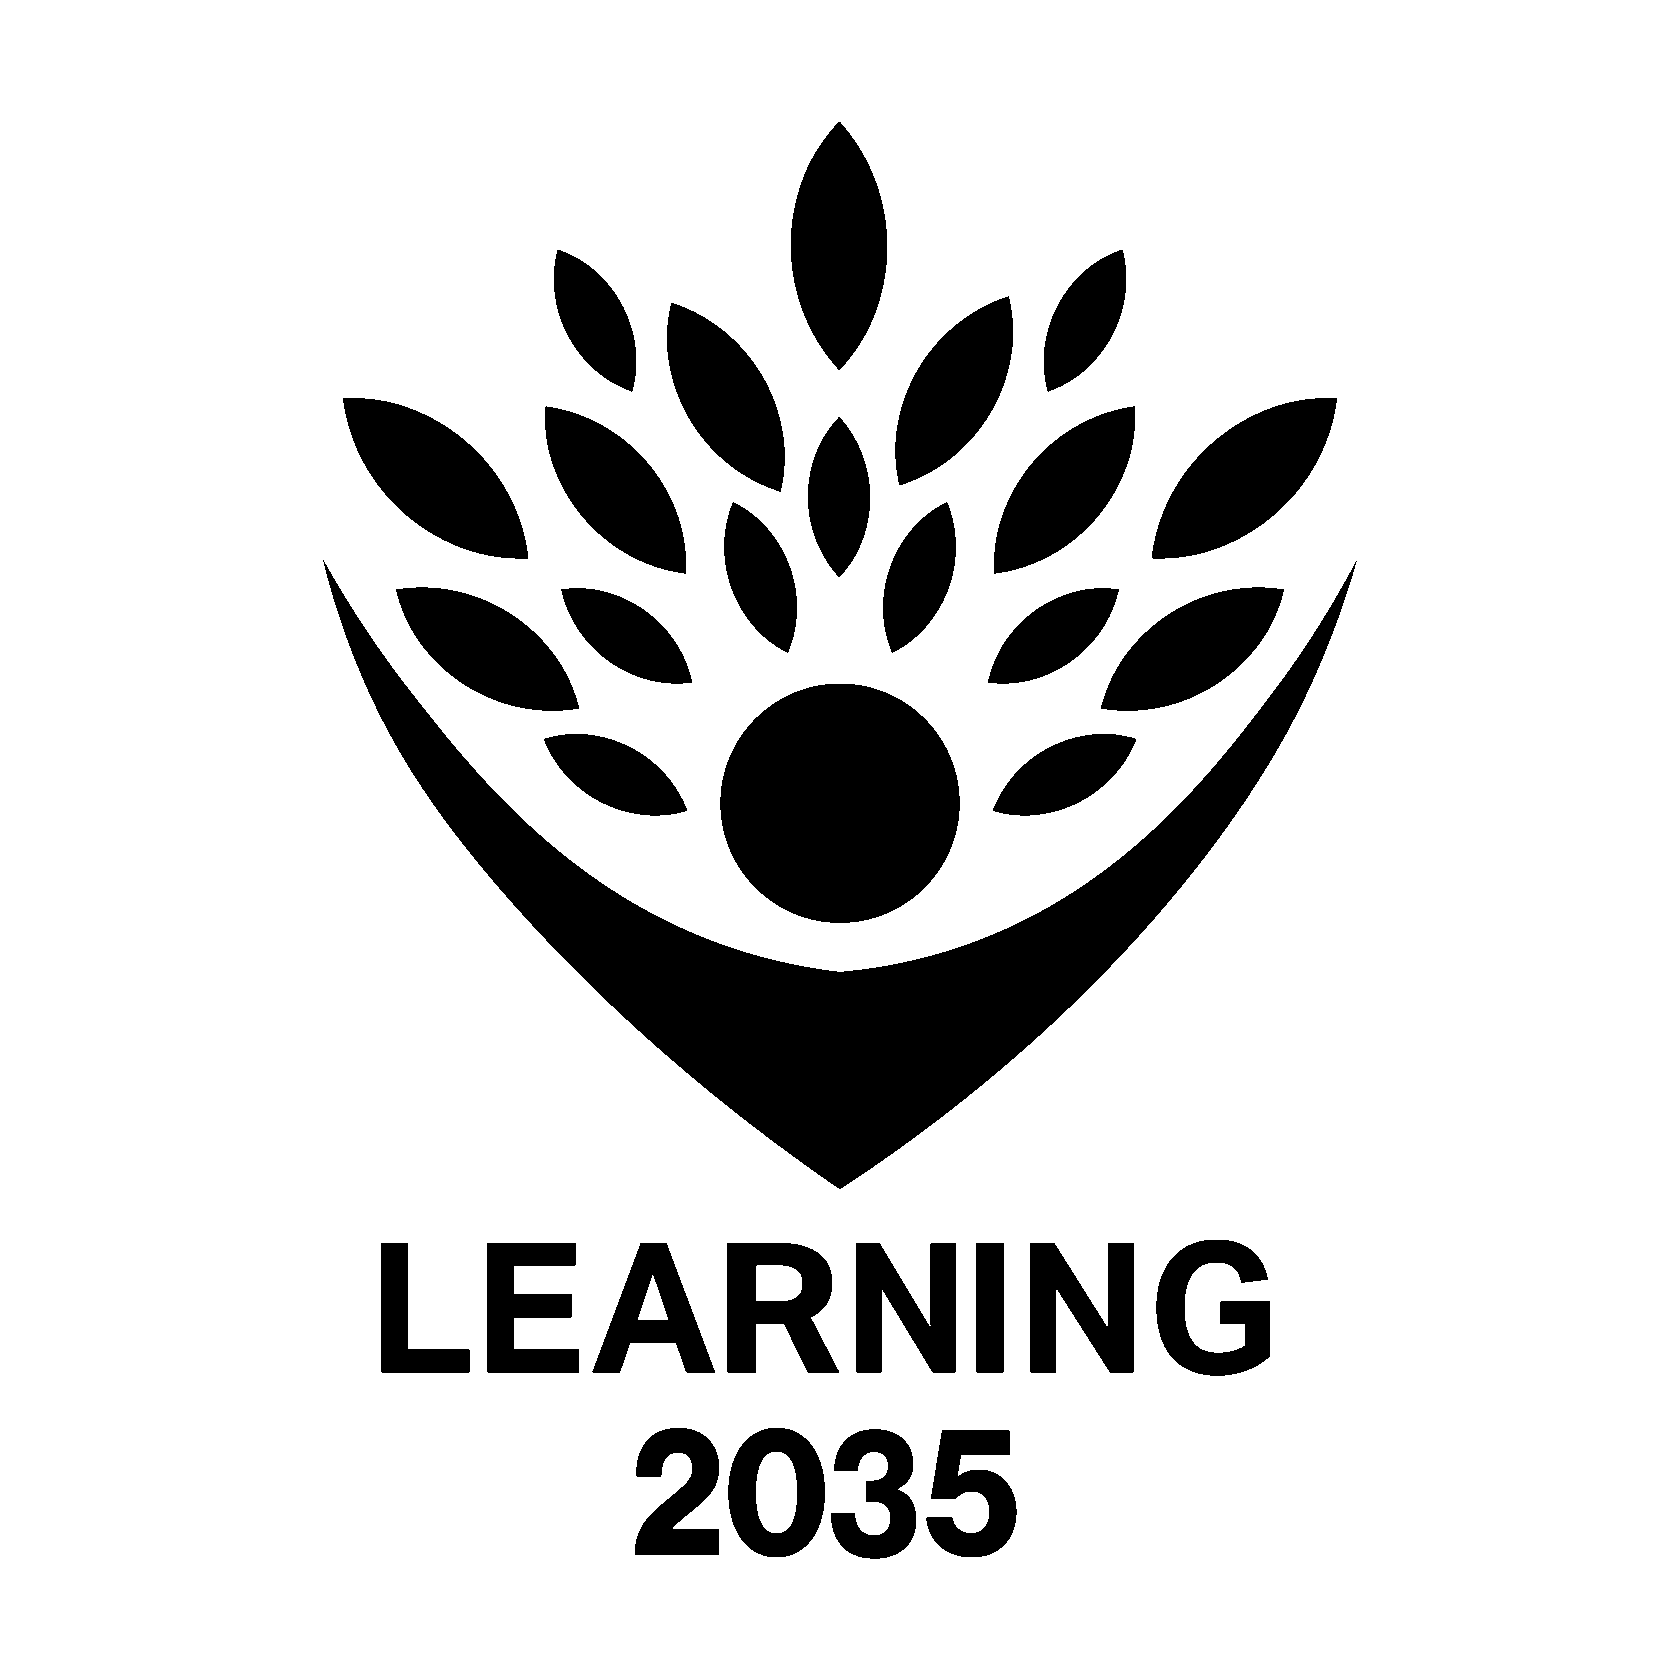 E-learning for 2035